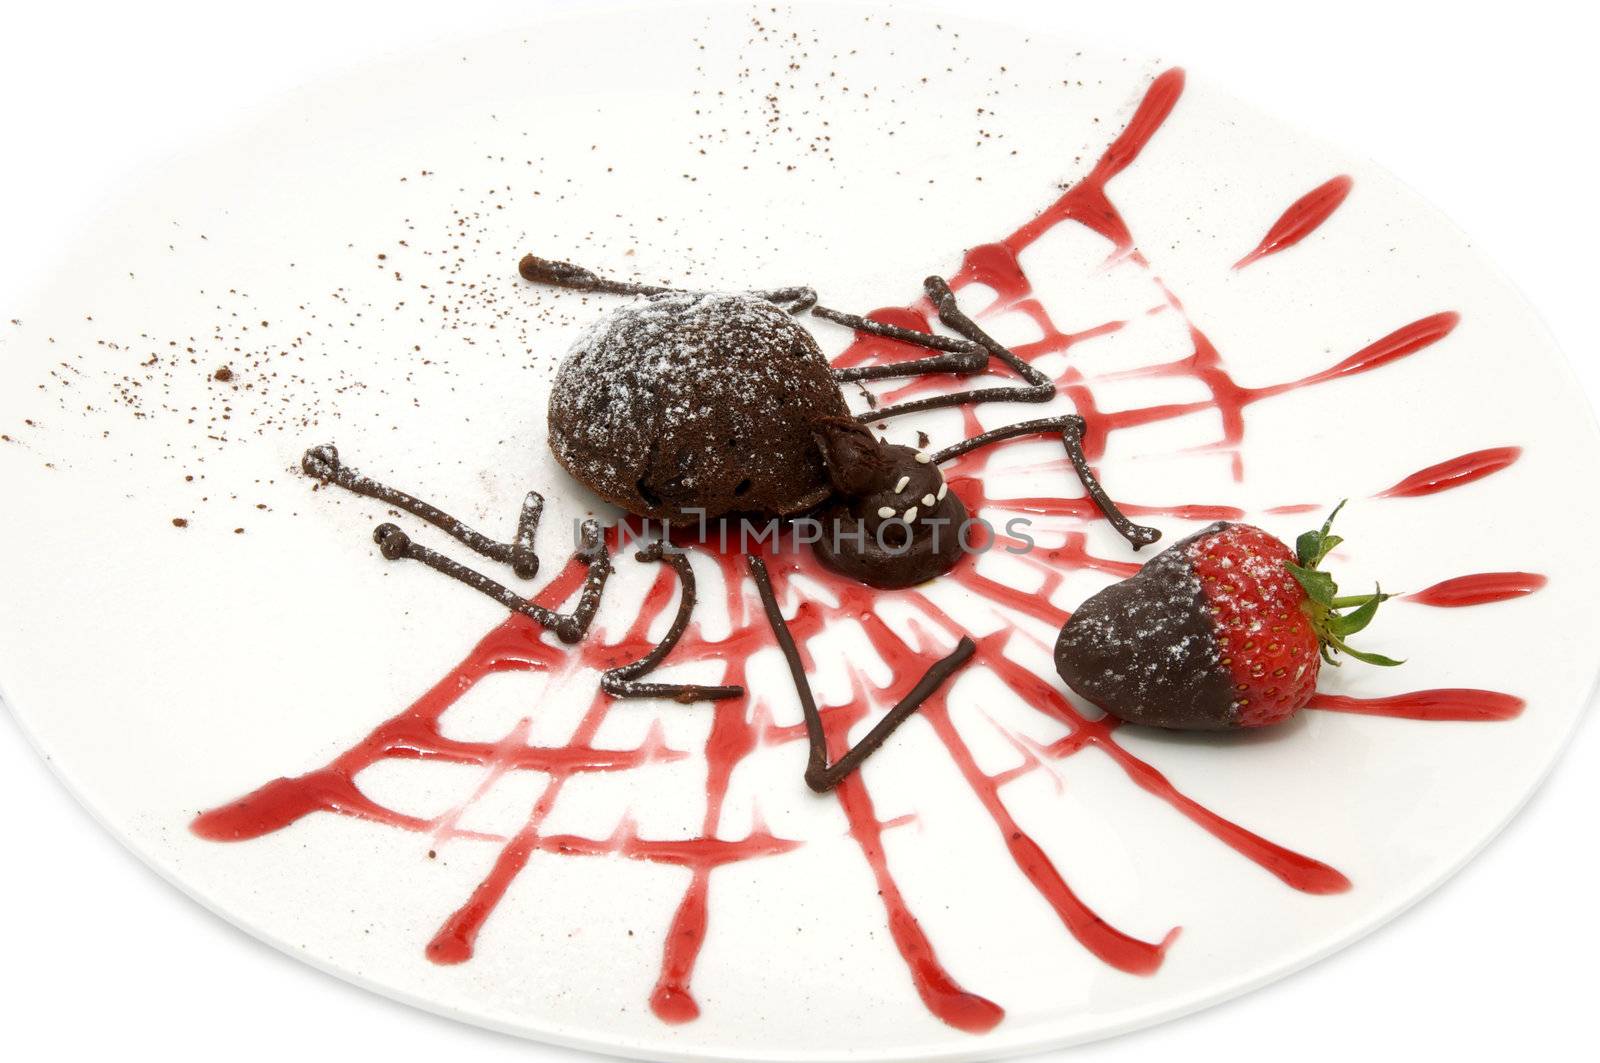 Strawberries and chocolate dessert in the form of a spider on a white background